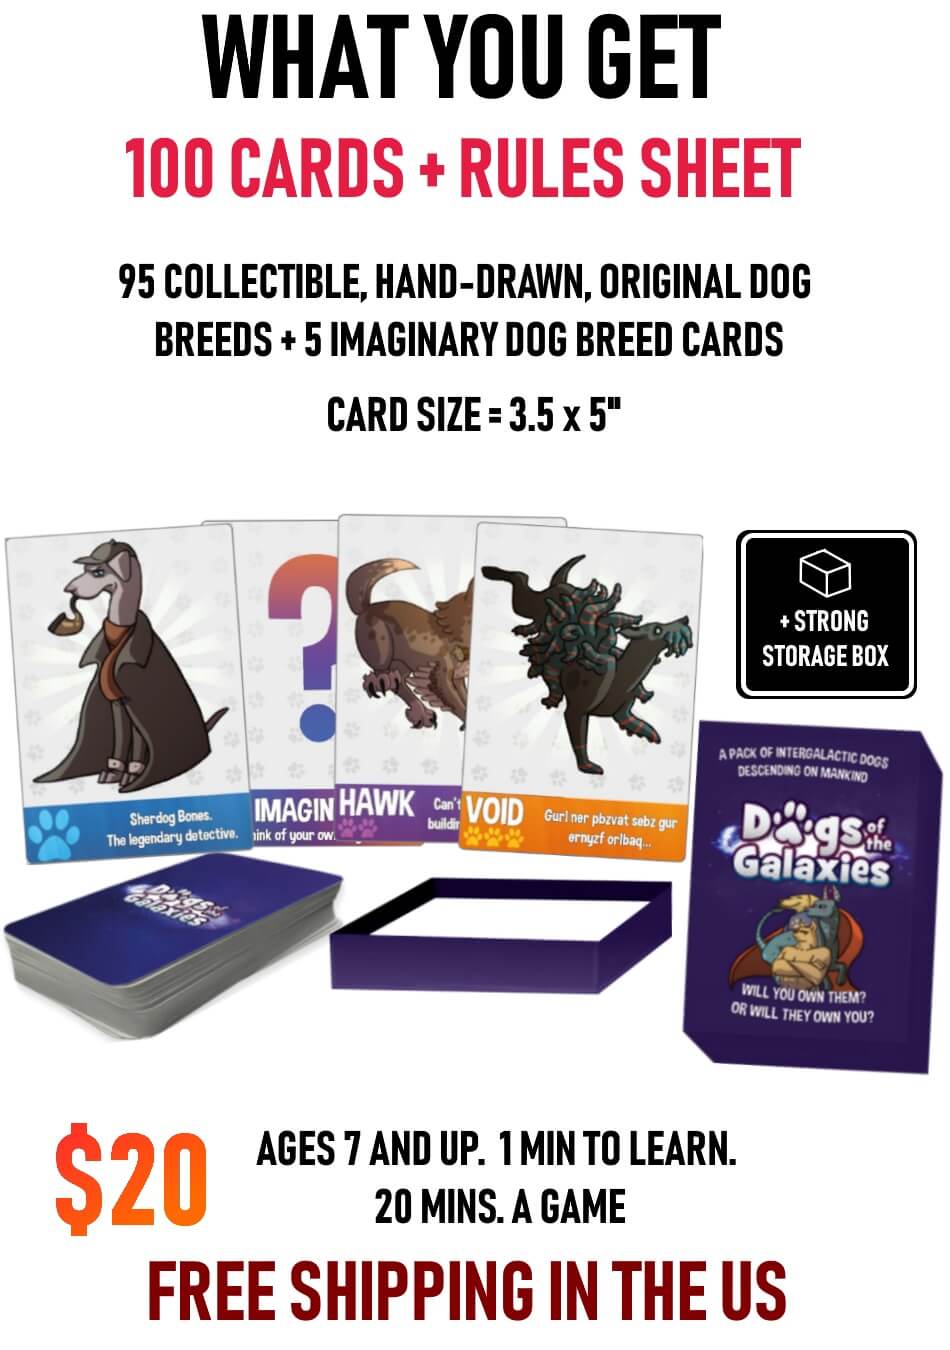 Dogs of the Galaxies card game rewards